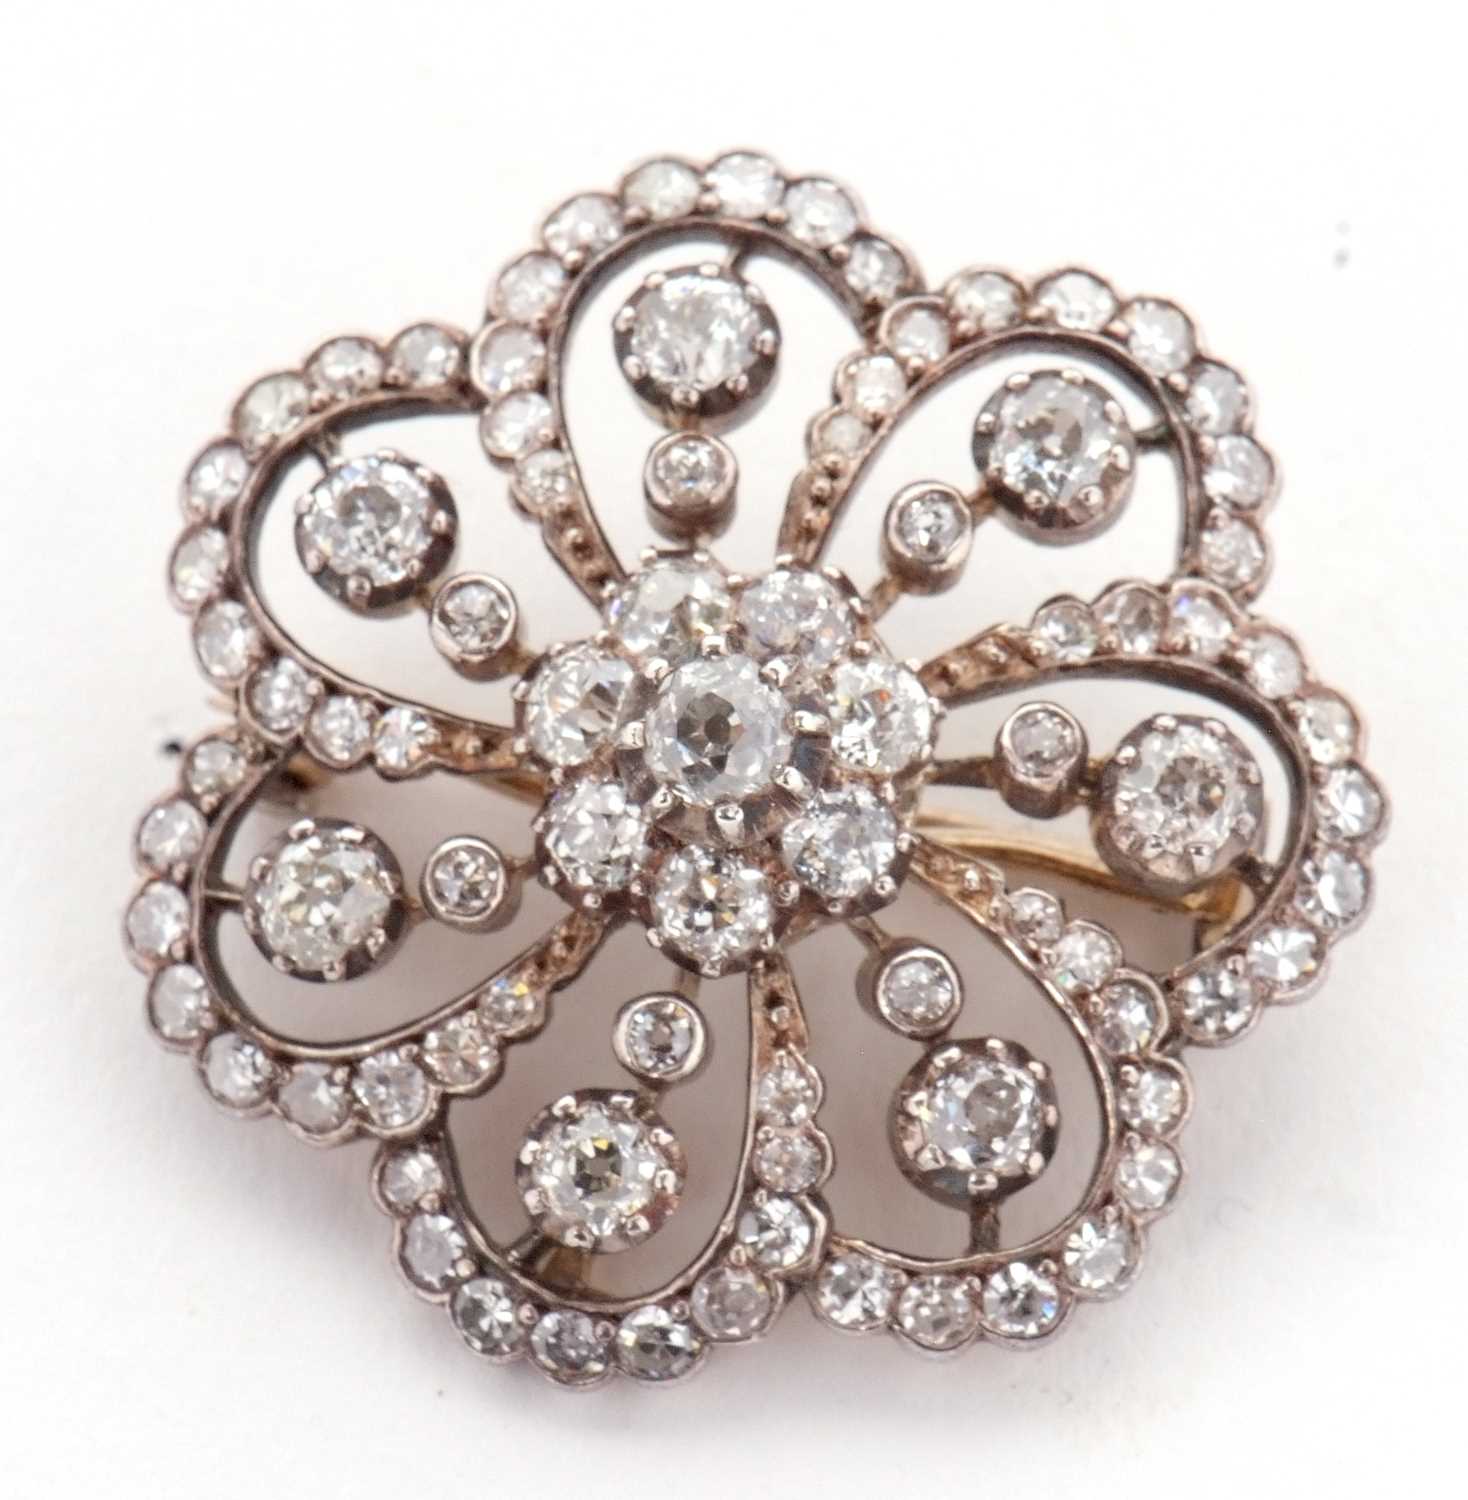 A late 19th/early 20th century diamond brooch, the central diamond flowerhead cluster, surrounded by - Image 2 of 8